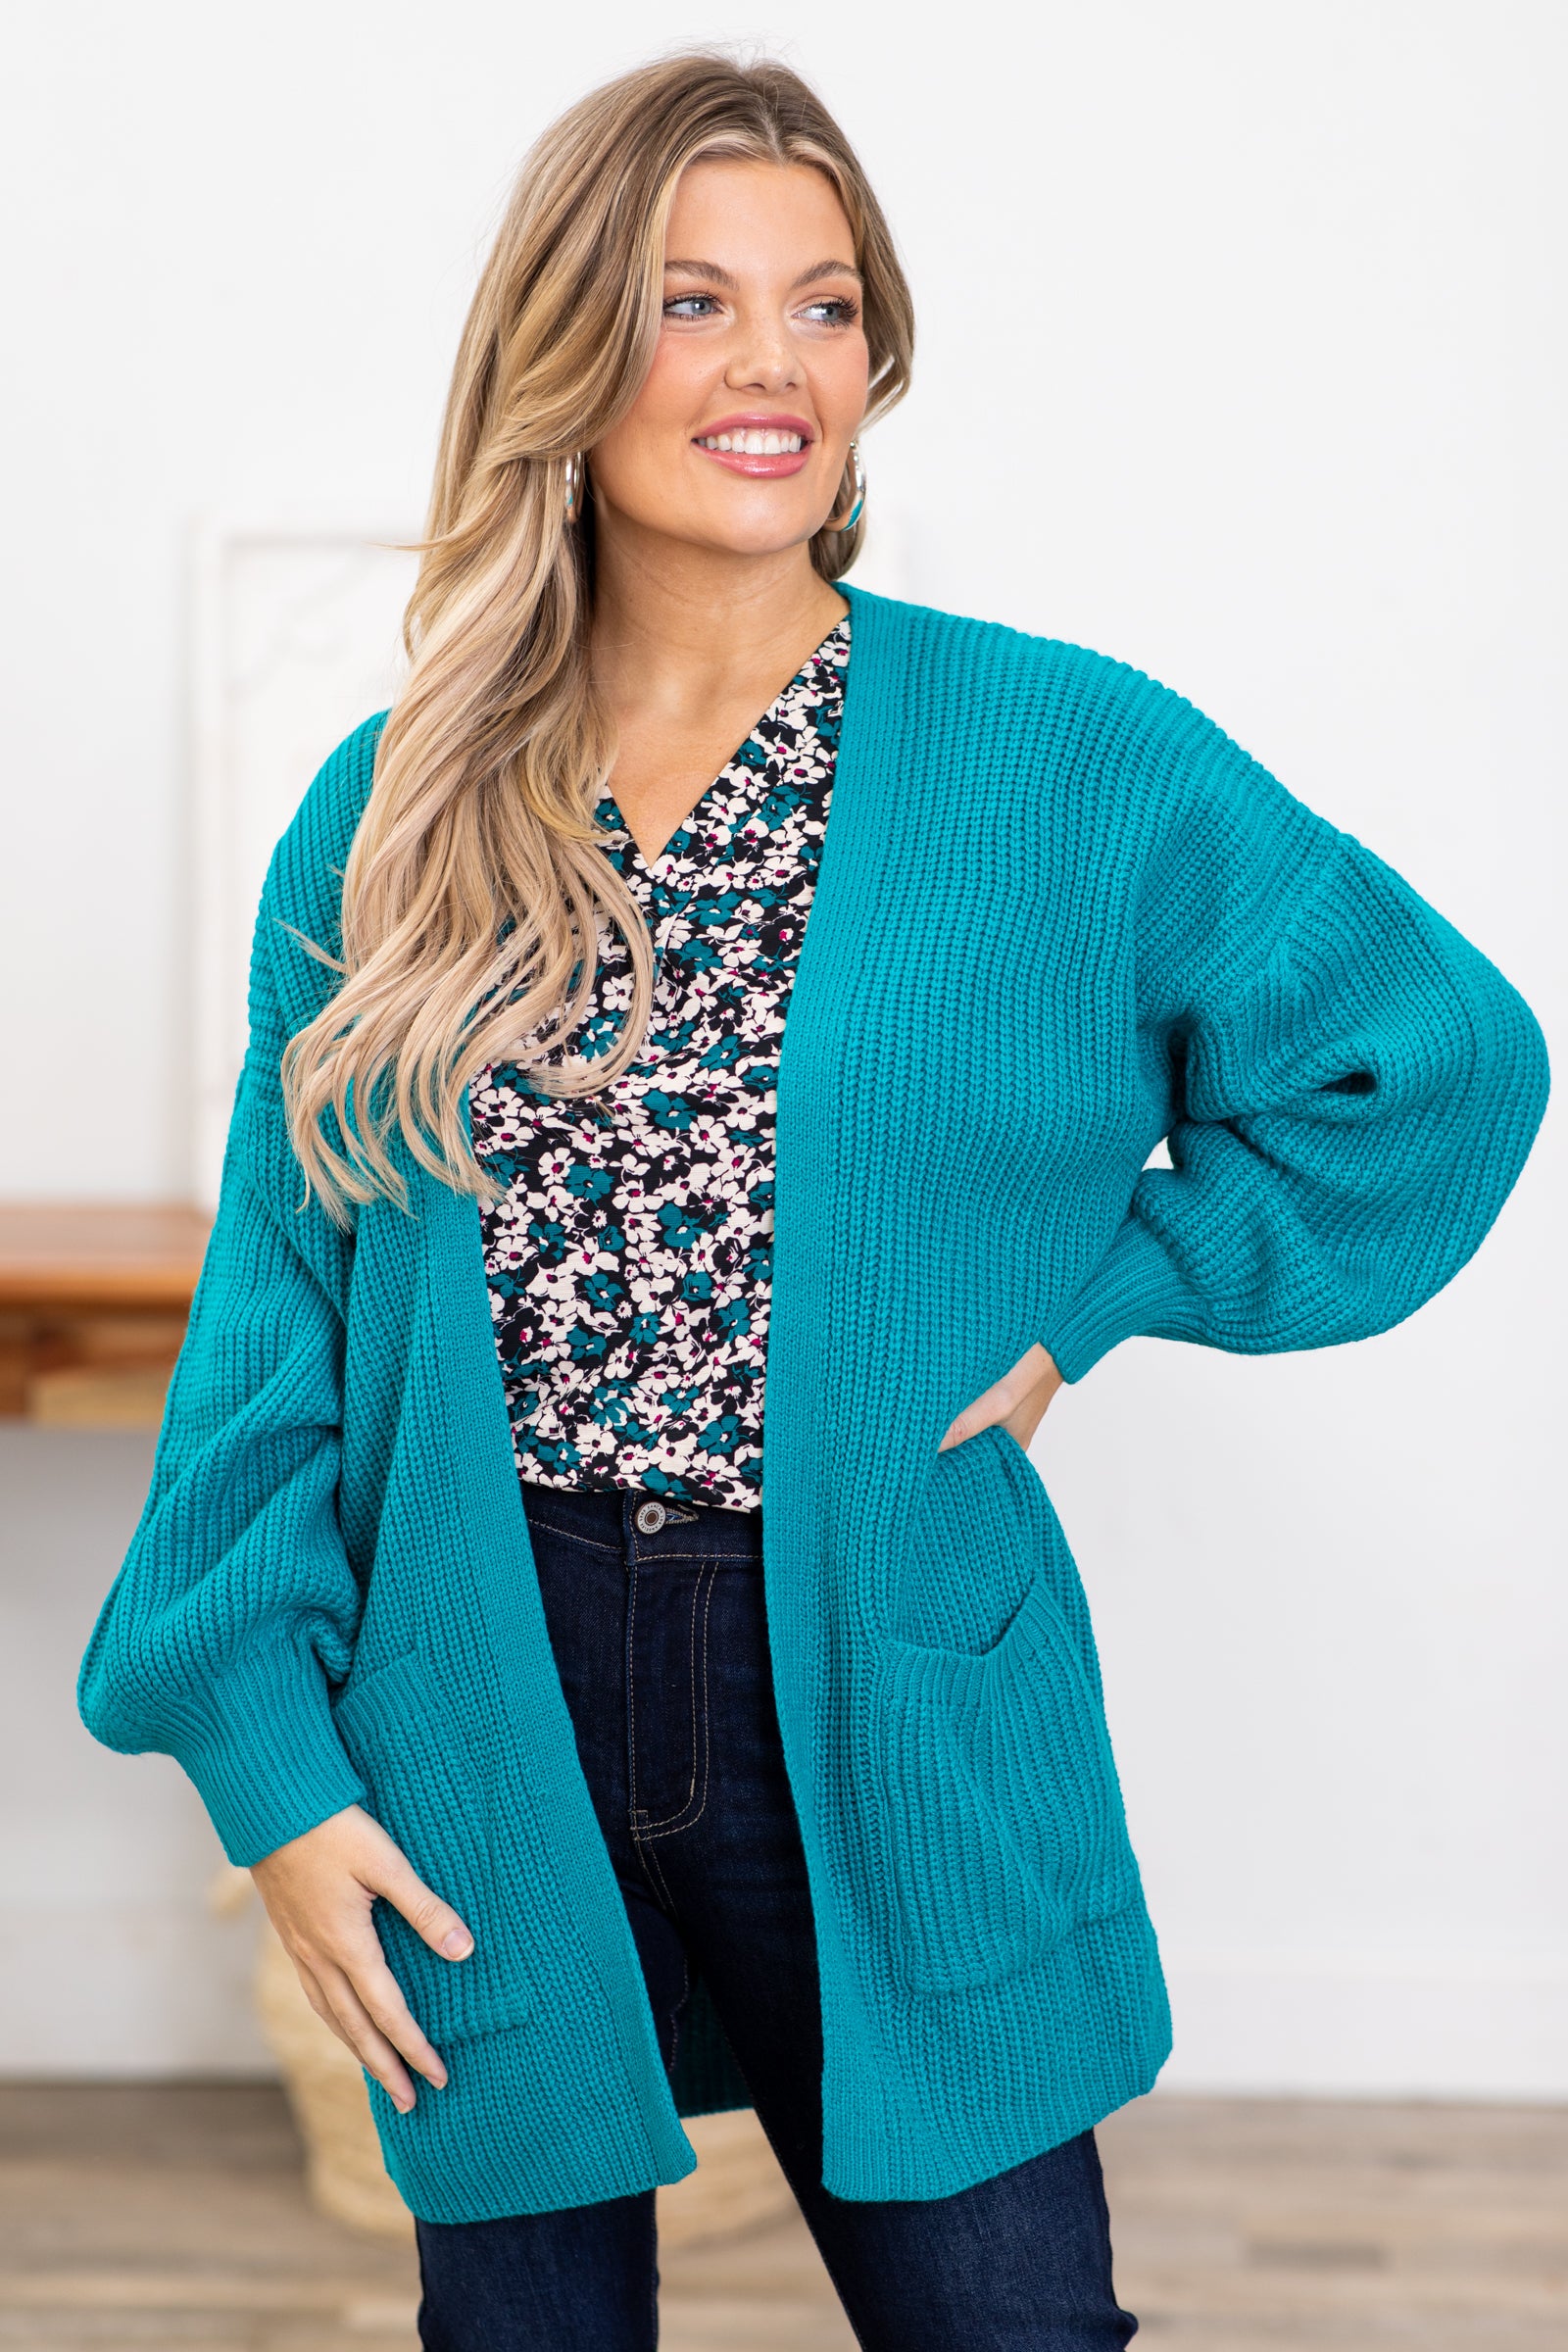 Teal and Berry Floral Print Notch Neck Top